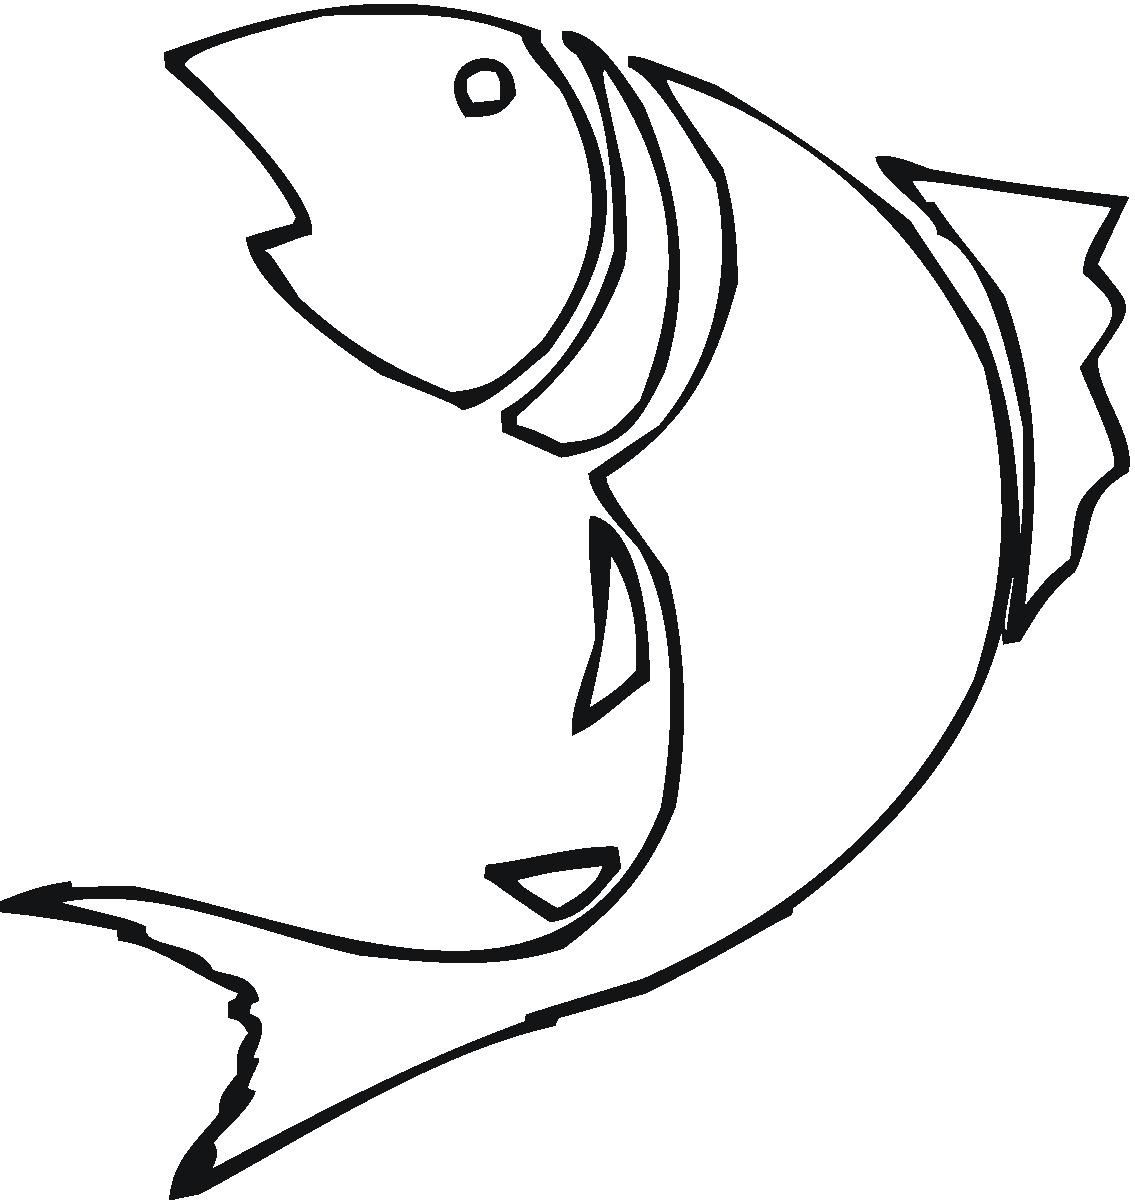 Fish drawing outline.